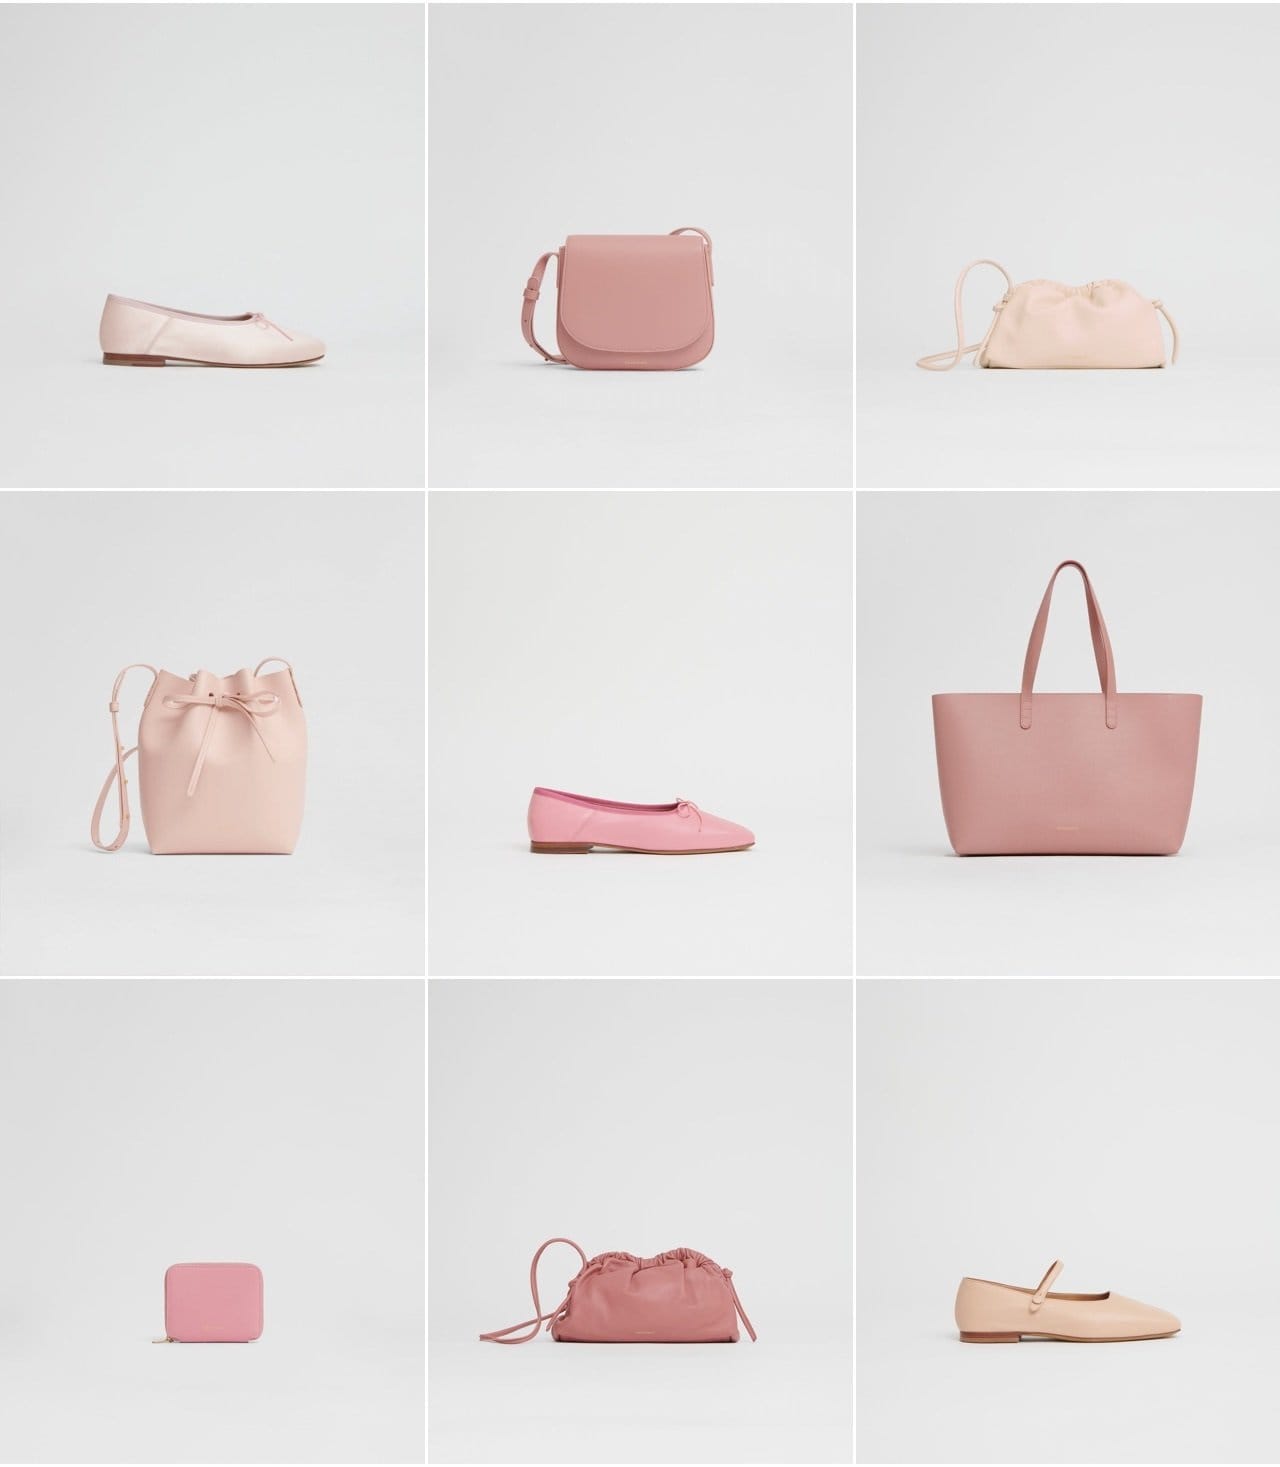 Discover ballerinas, bags, and wallets in our new shades of pink.